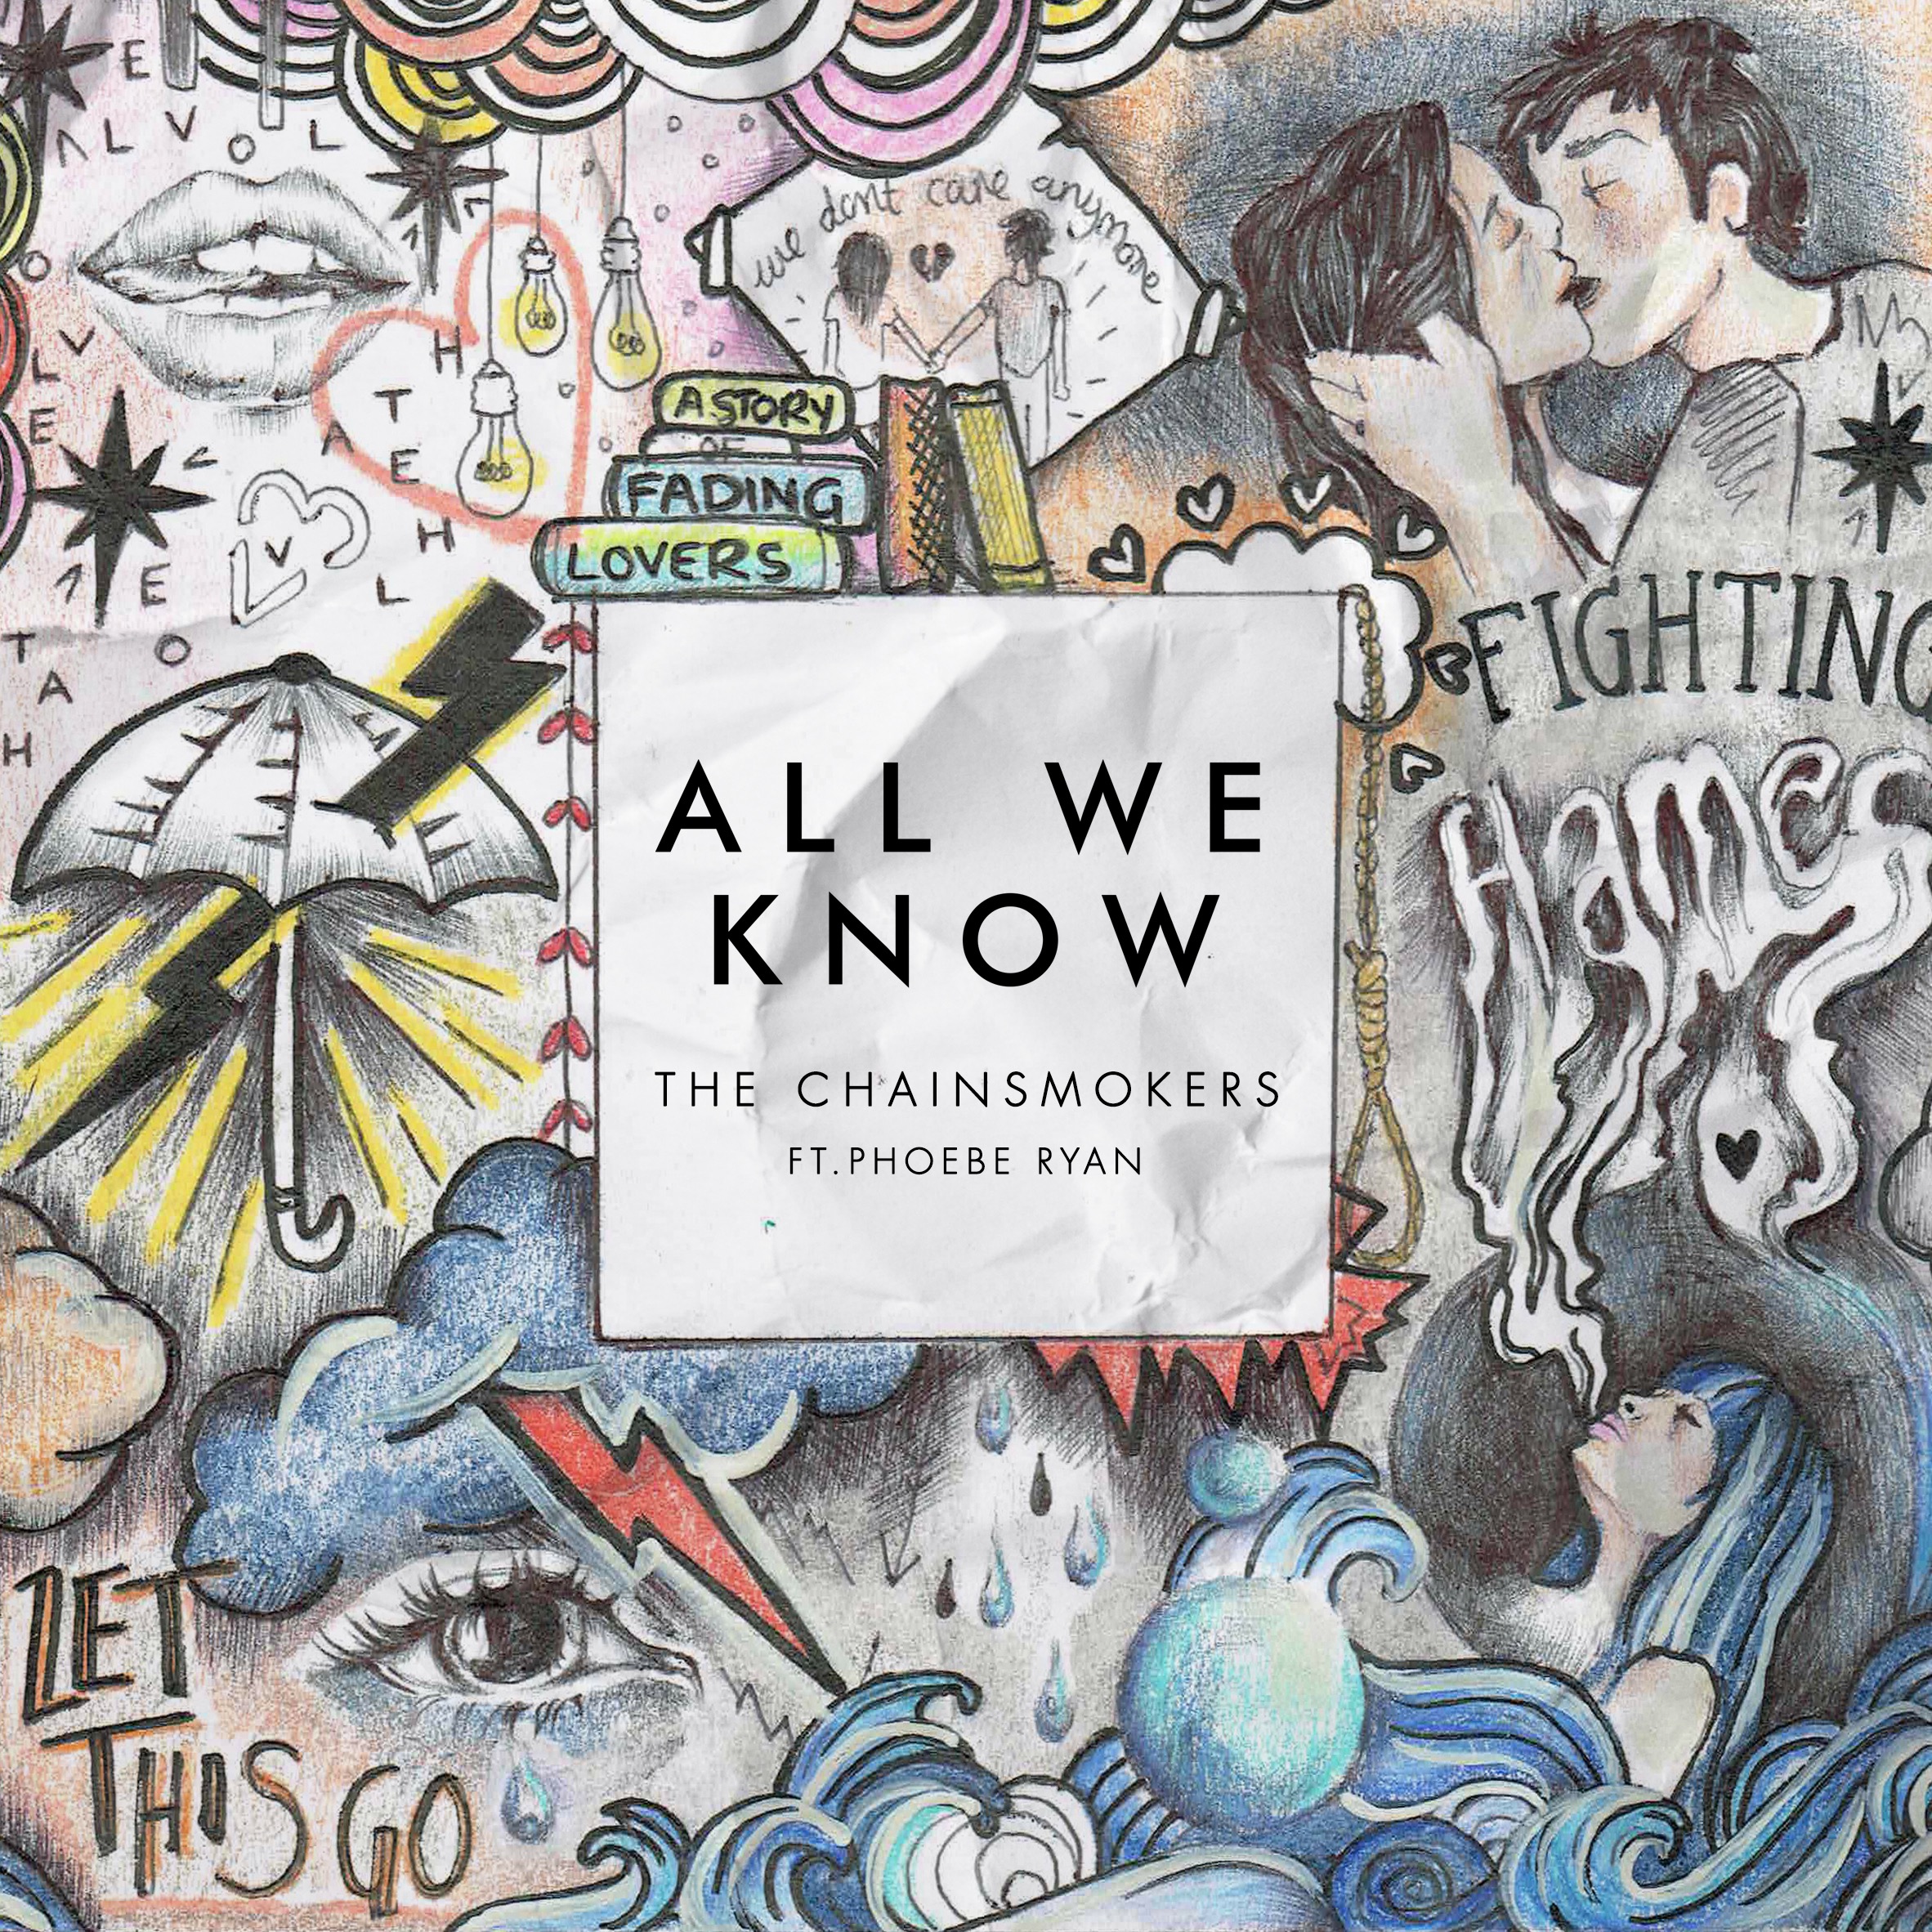 The Chainsmokers cover art for All We Know featuring Phoebe Ryan. Photo provided.